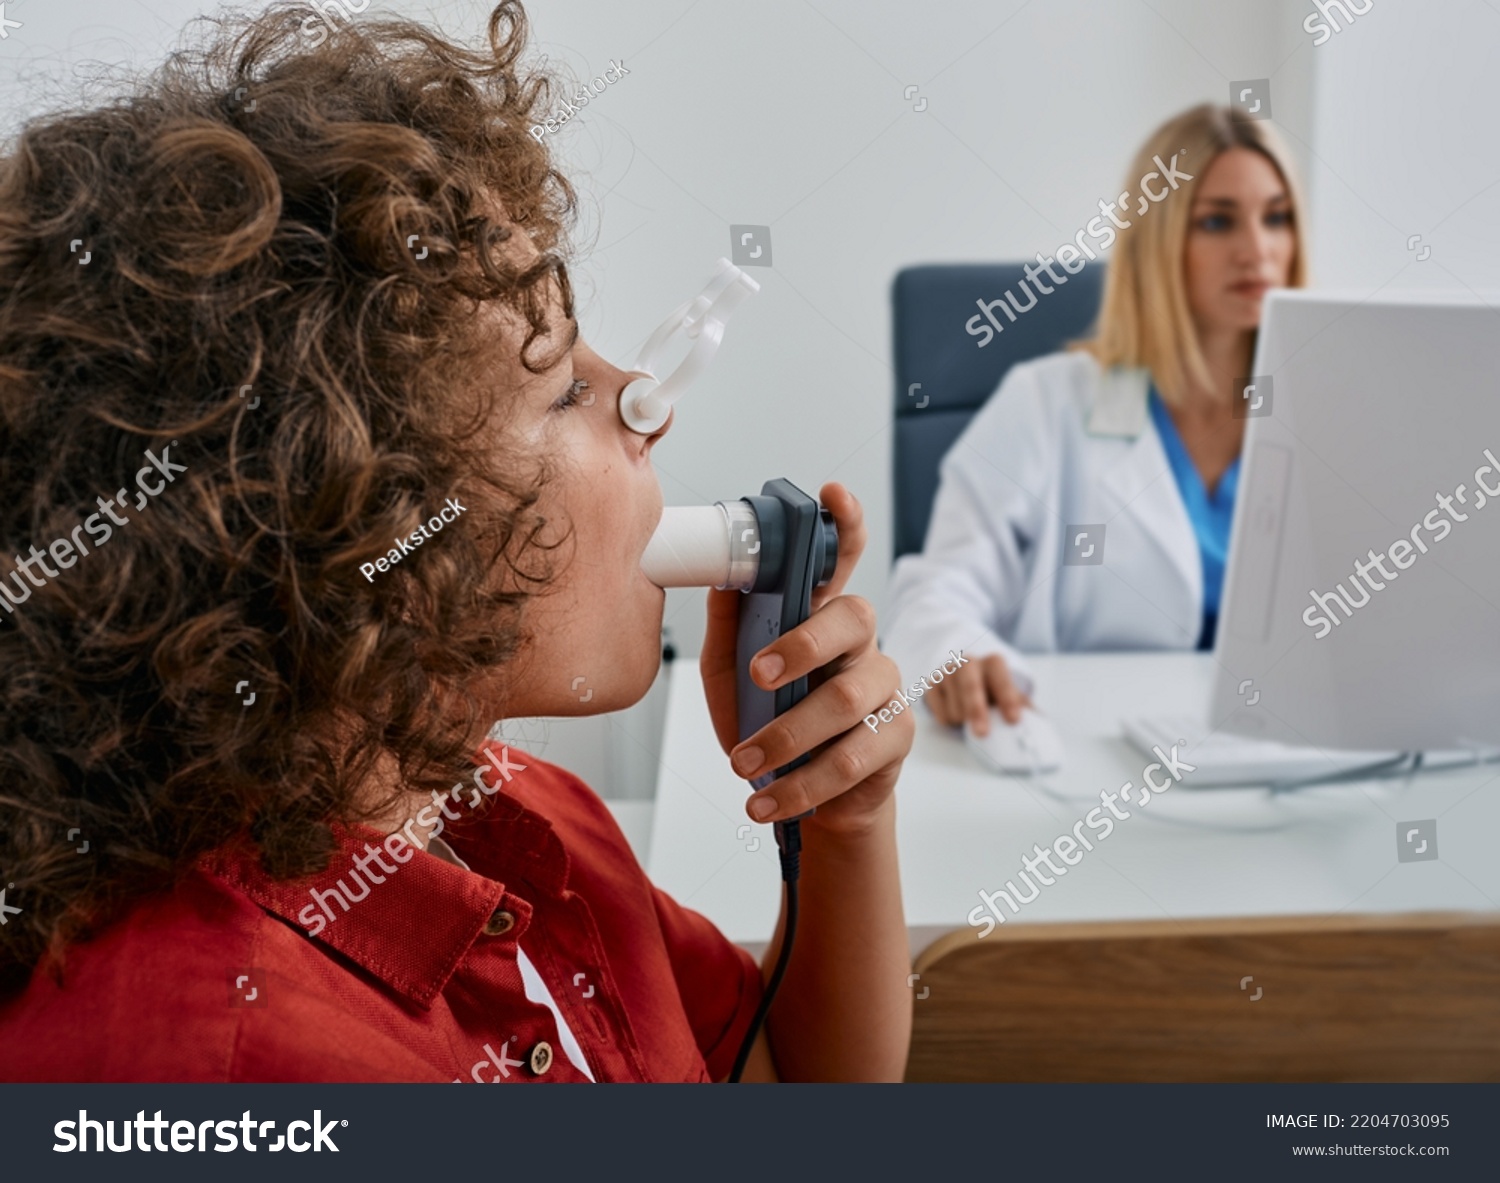 Male child during breathing spirometry and pulmonary function test using medical spirometer with doctor looking at test results on monitor #2204703095